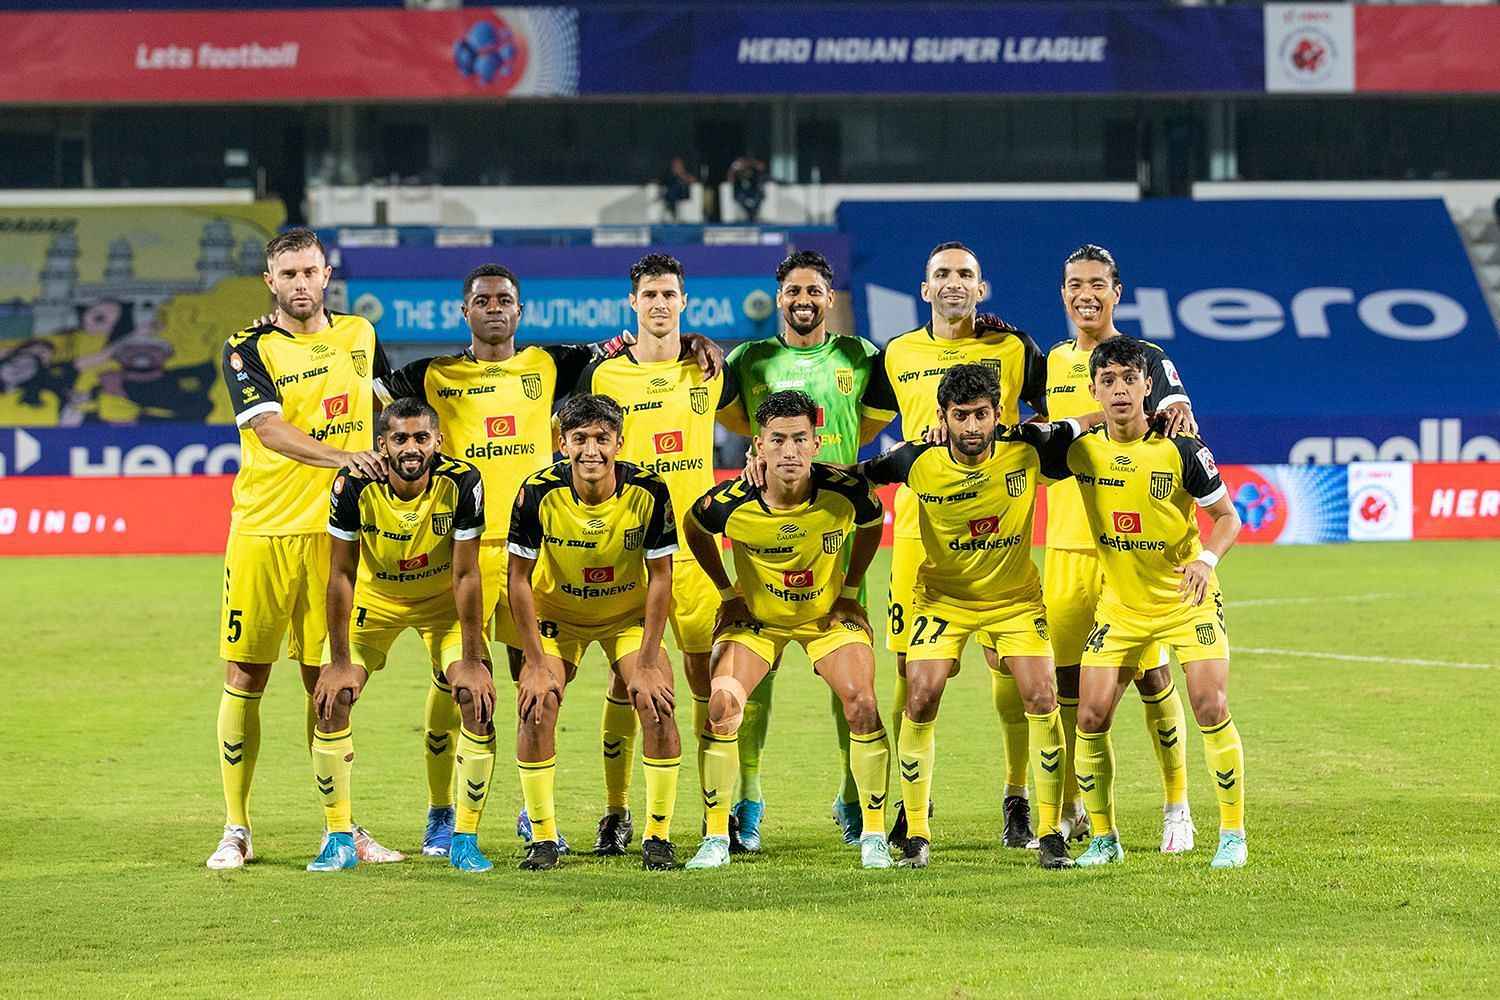 Hyderabad FC players line-up ahead of their clash against NorthEast United FC. (Image Courtesy: Twitter/HydFCOfficial)